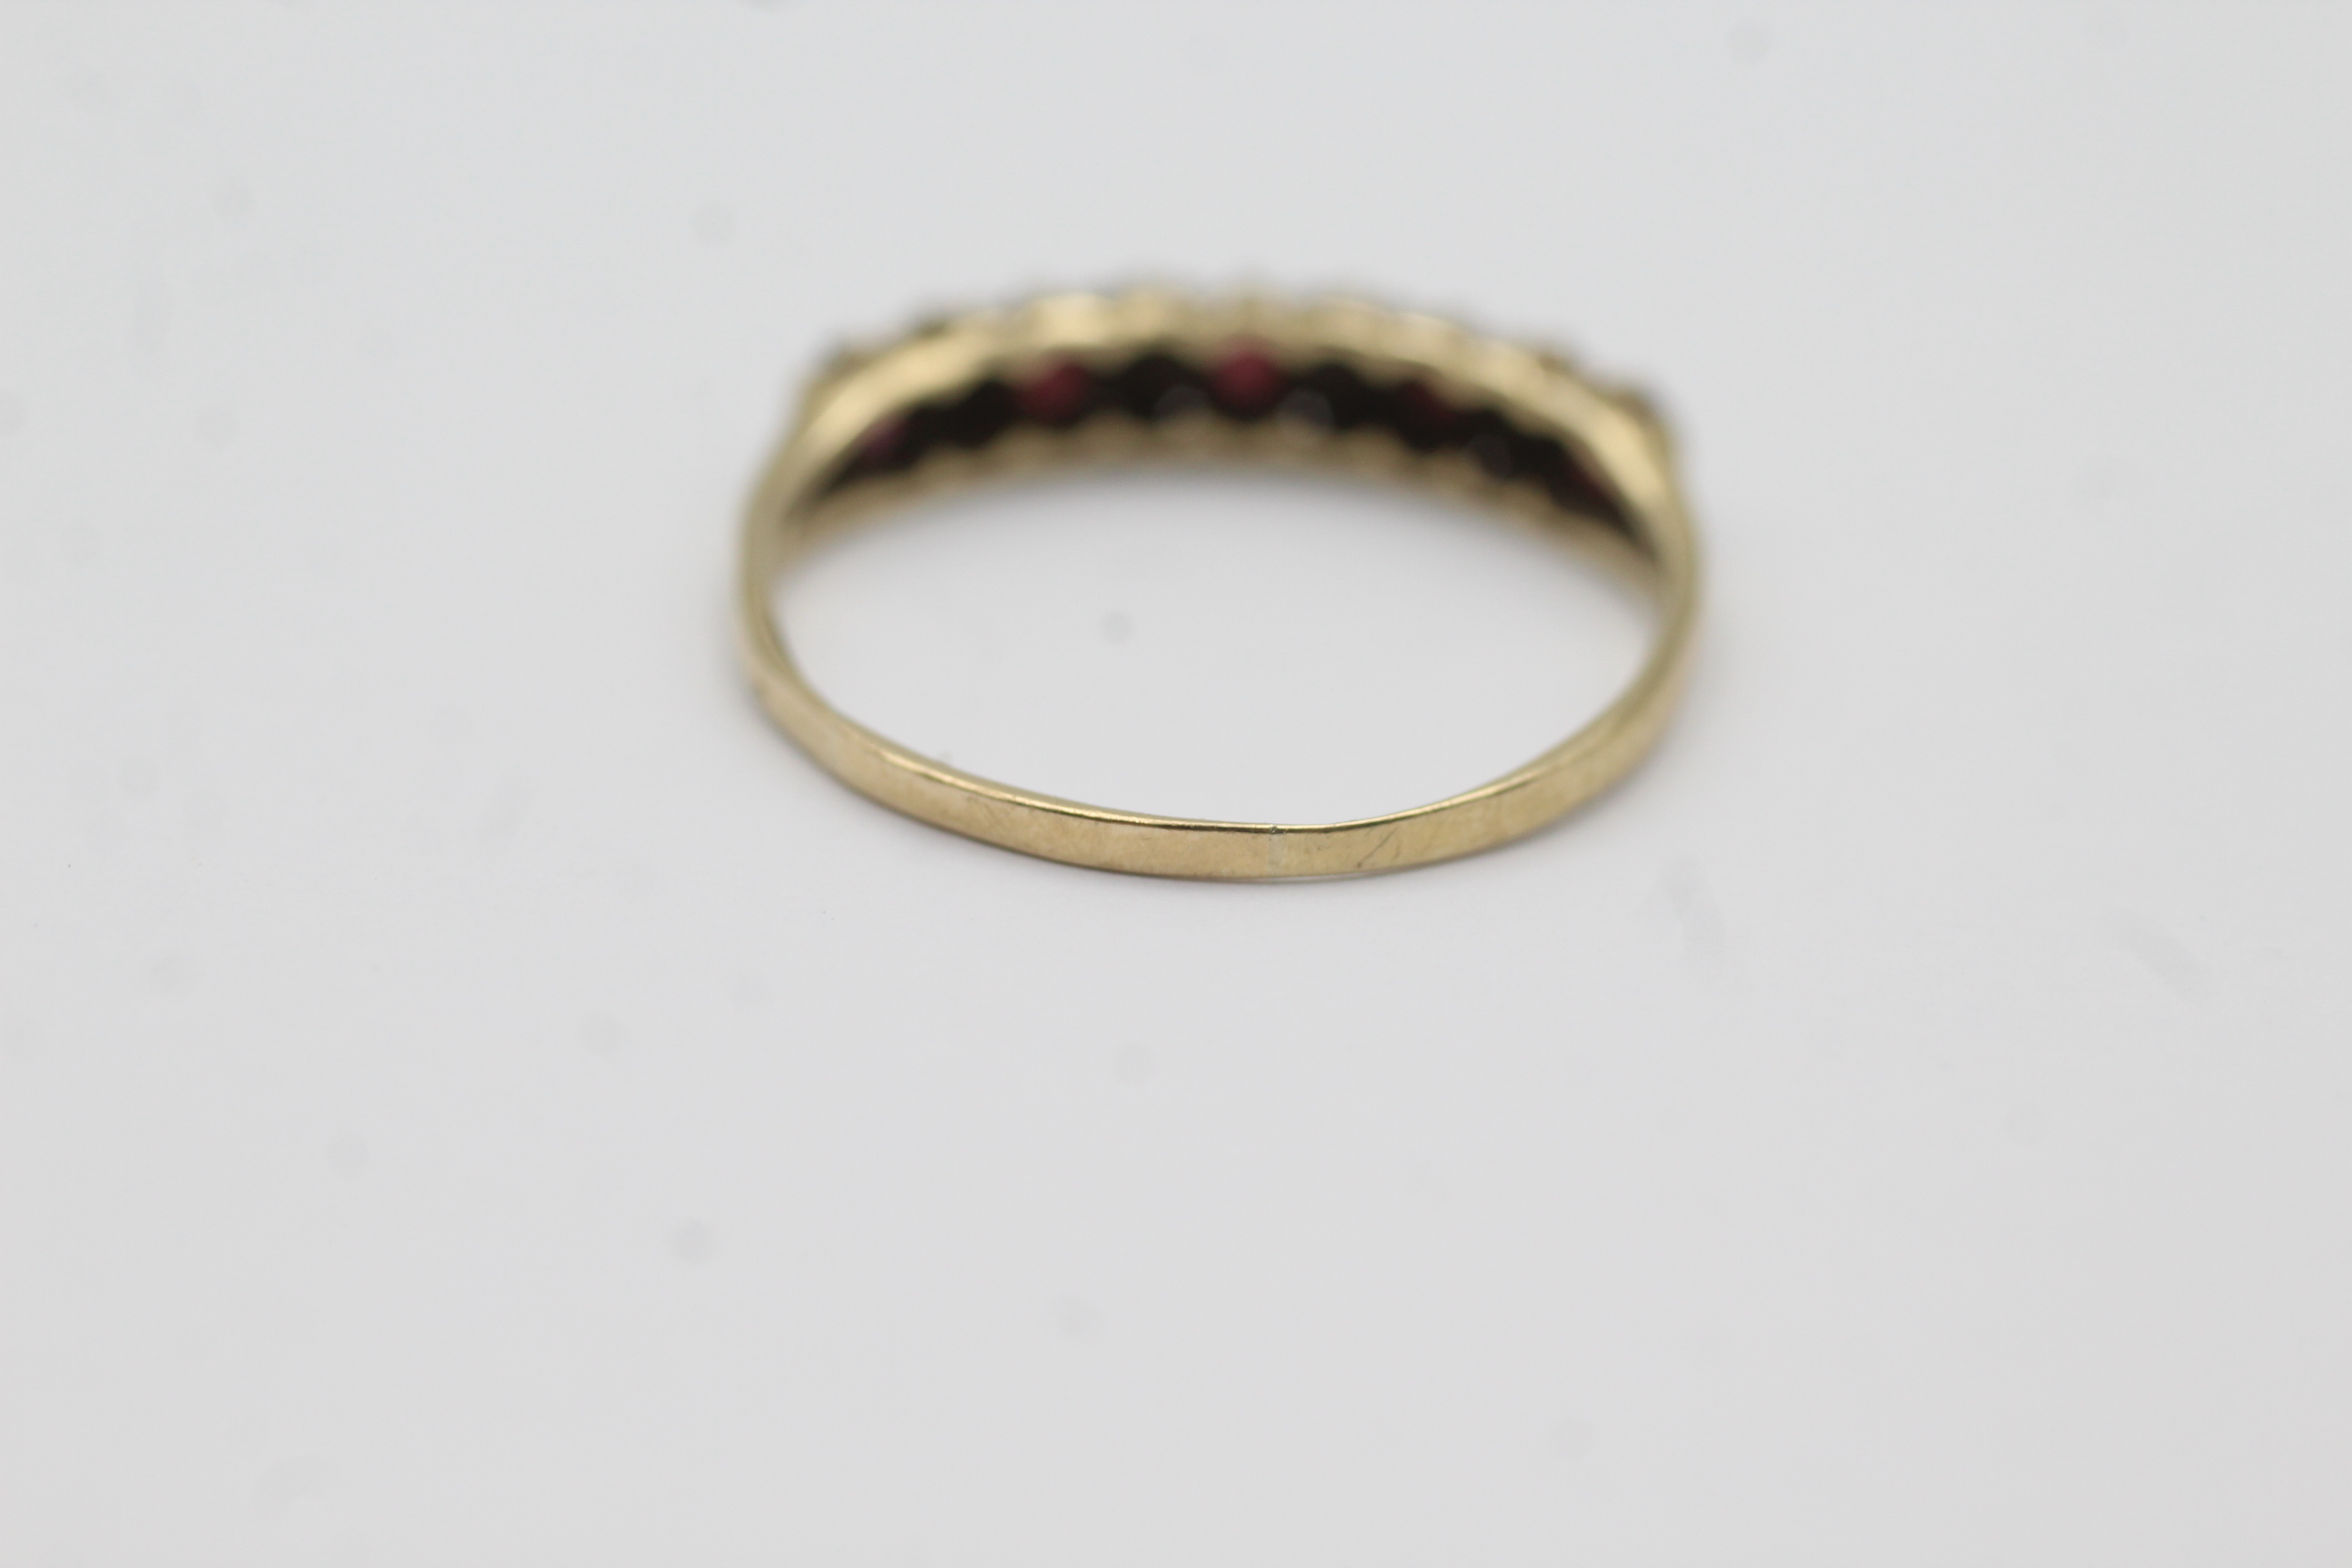 9ct gold ruby five stone ring with diamond spacers (1.4g) - Image 6 of 7